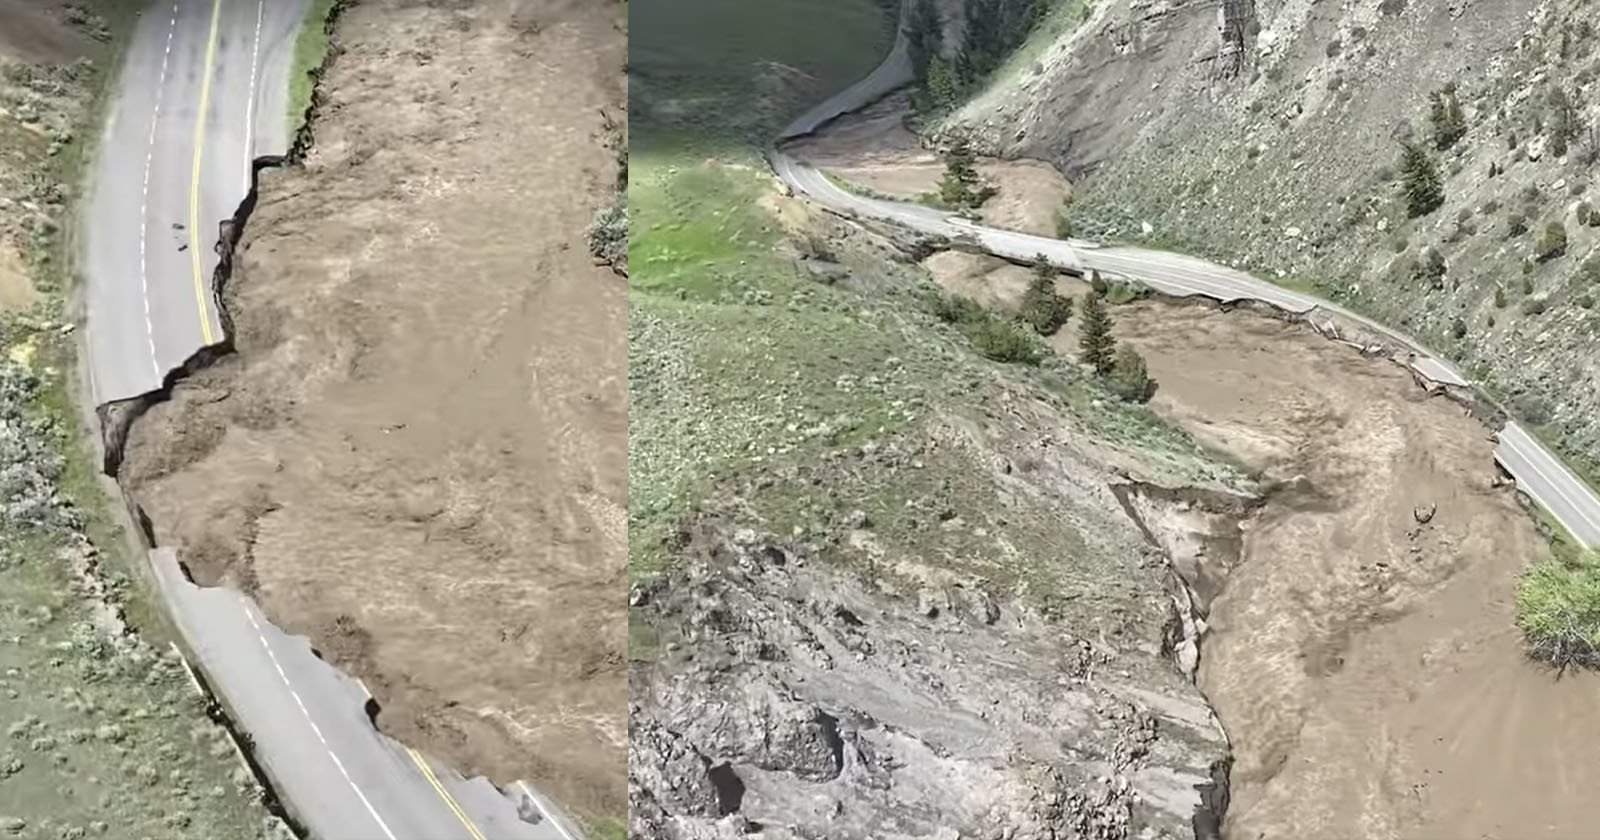 Aerial Footage Shows Devastating Flooding in Yellowstone National Park